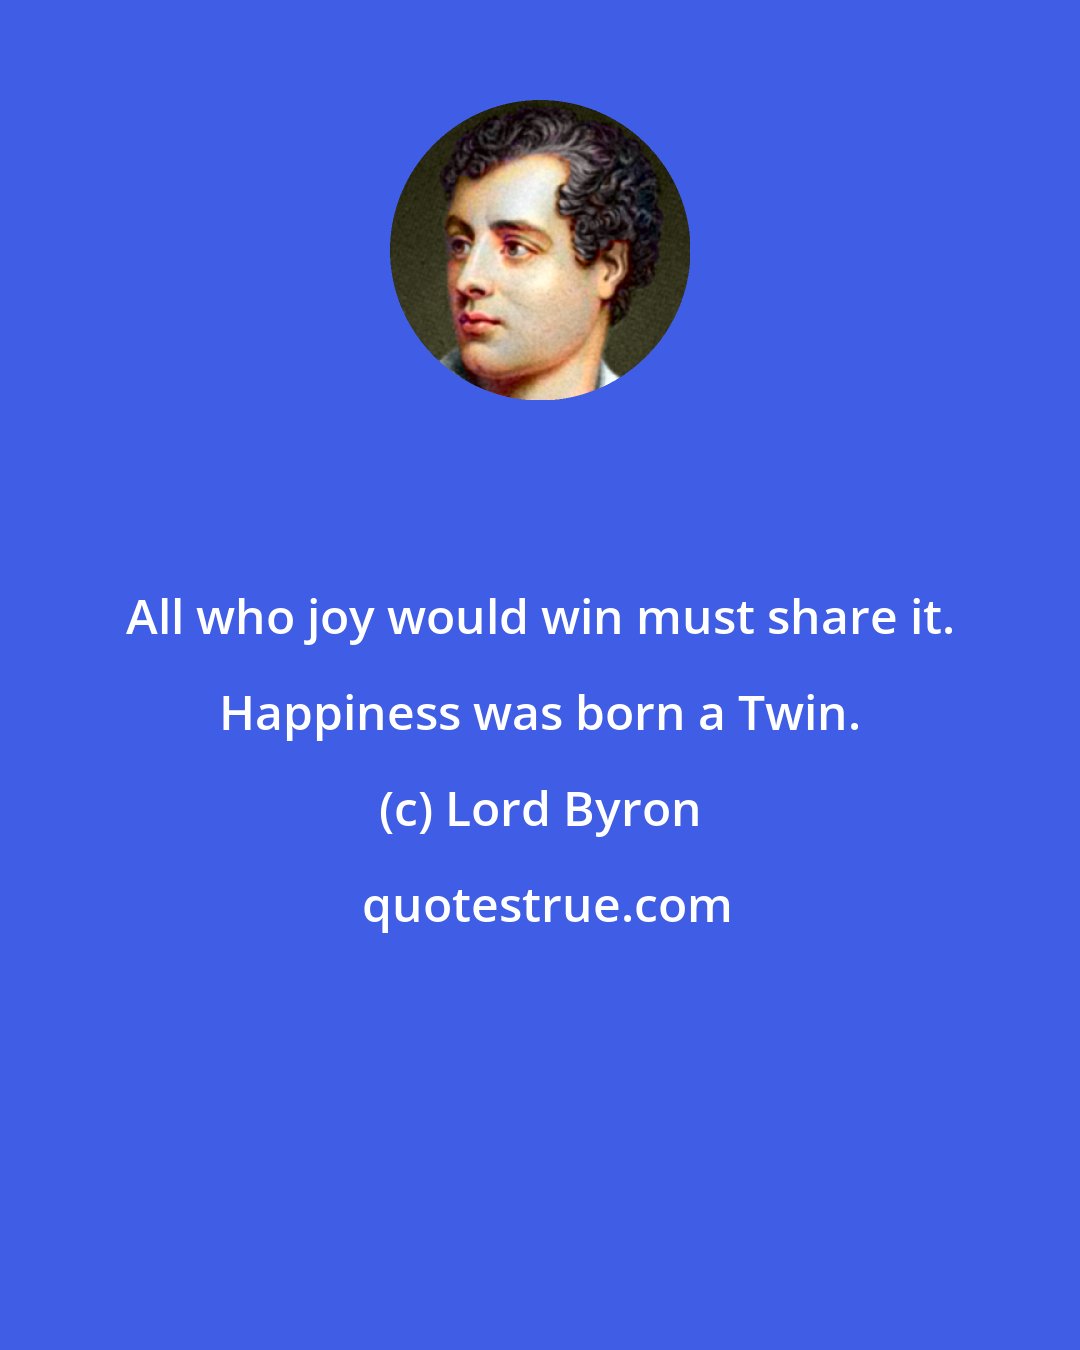 Lord Byron: All who joy would win must share it. Happiness was born a Twin.